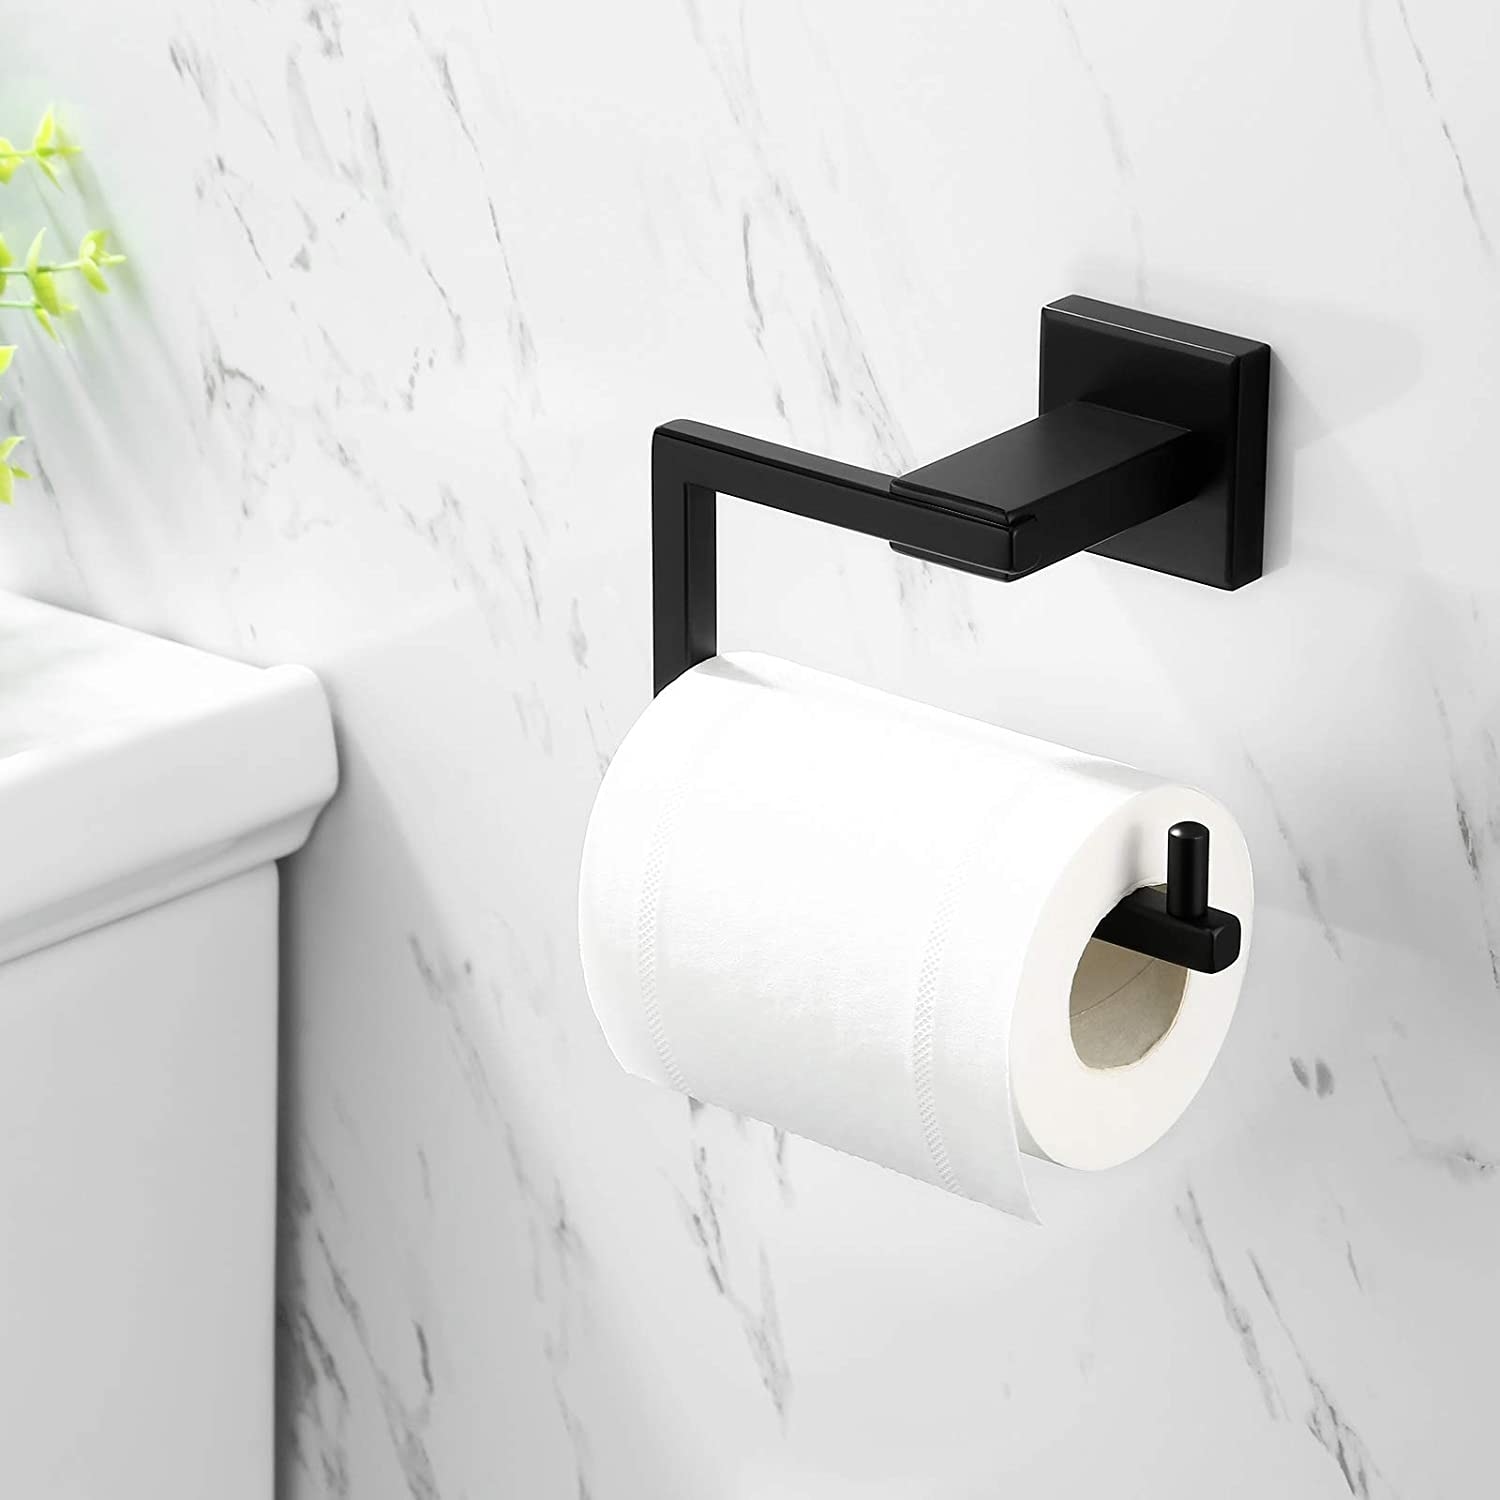 https://ak1.ostkcdn.com/images/products/is/images/direct/7950035e401b7067182e7d85b1d2886eb641f94c/Modern-Square-Style-Wall-Mount-Toilet-Paper-Holder.jpg